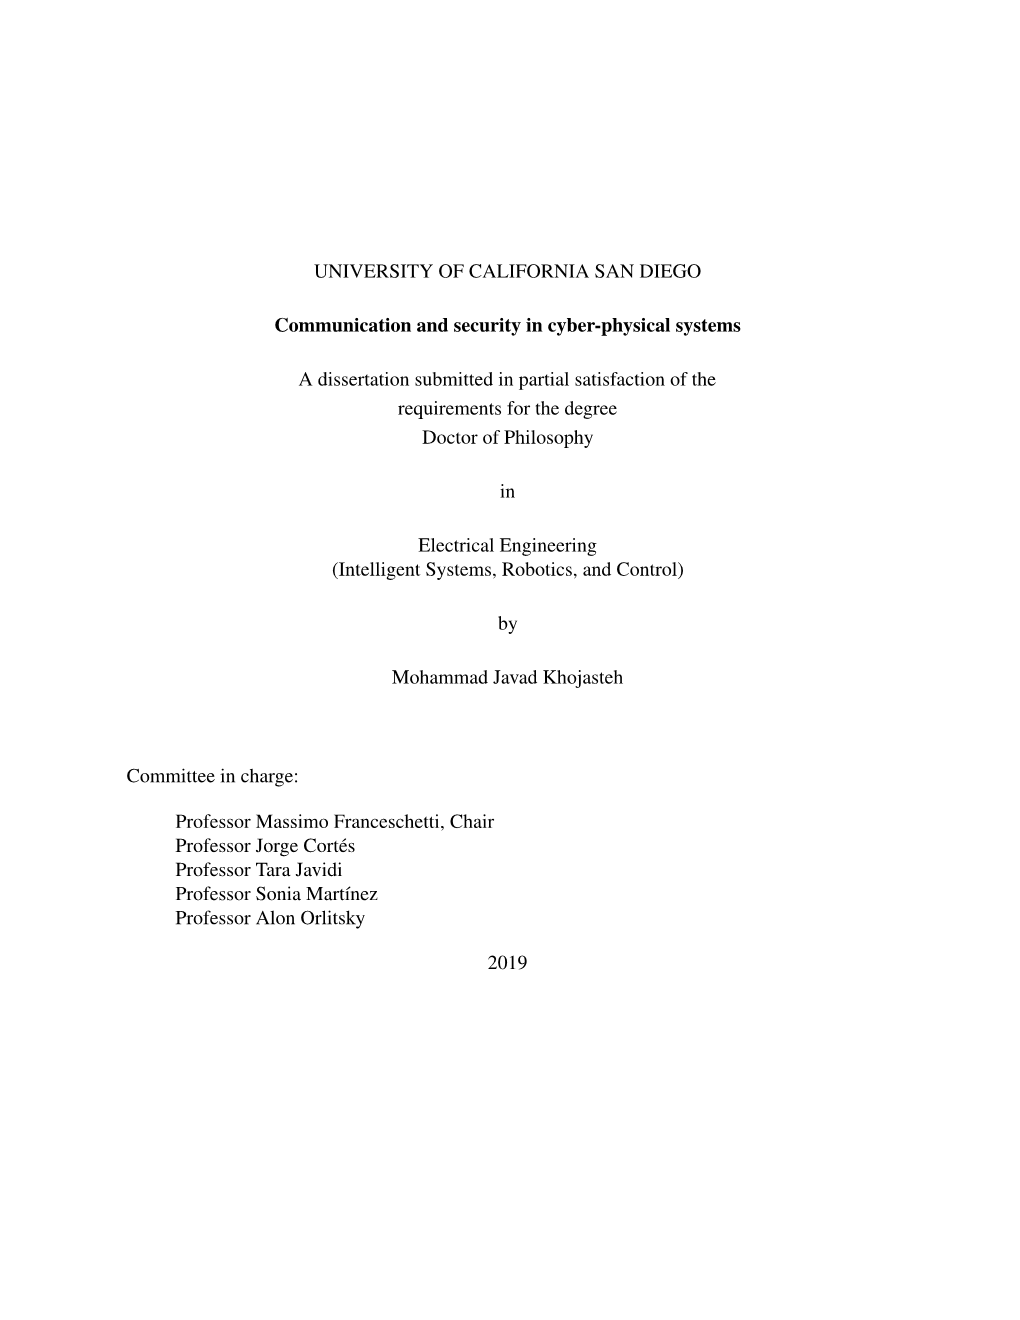 UNIVERSITY of CALIFORNIA SAN DIEGO Communication and Security in Cyber-Physical Systems a Dissertation Submitted in Partial Sati